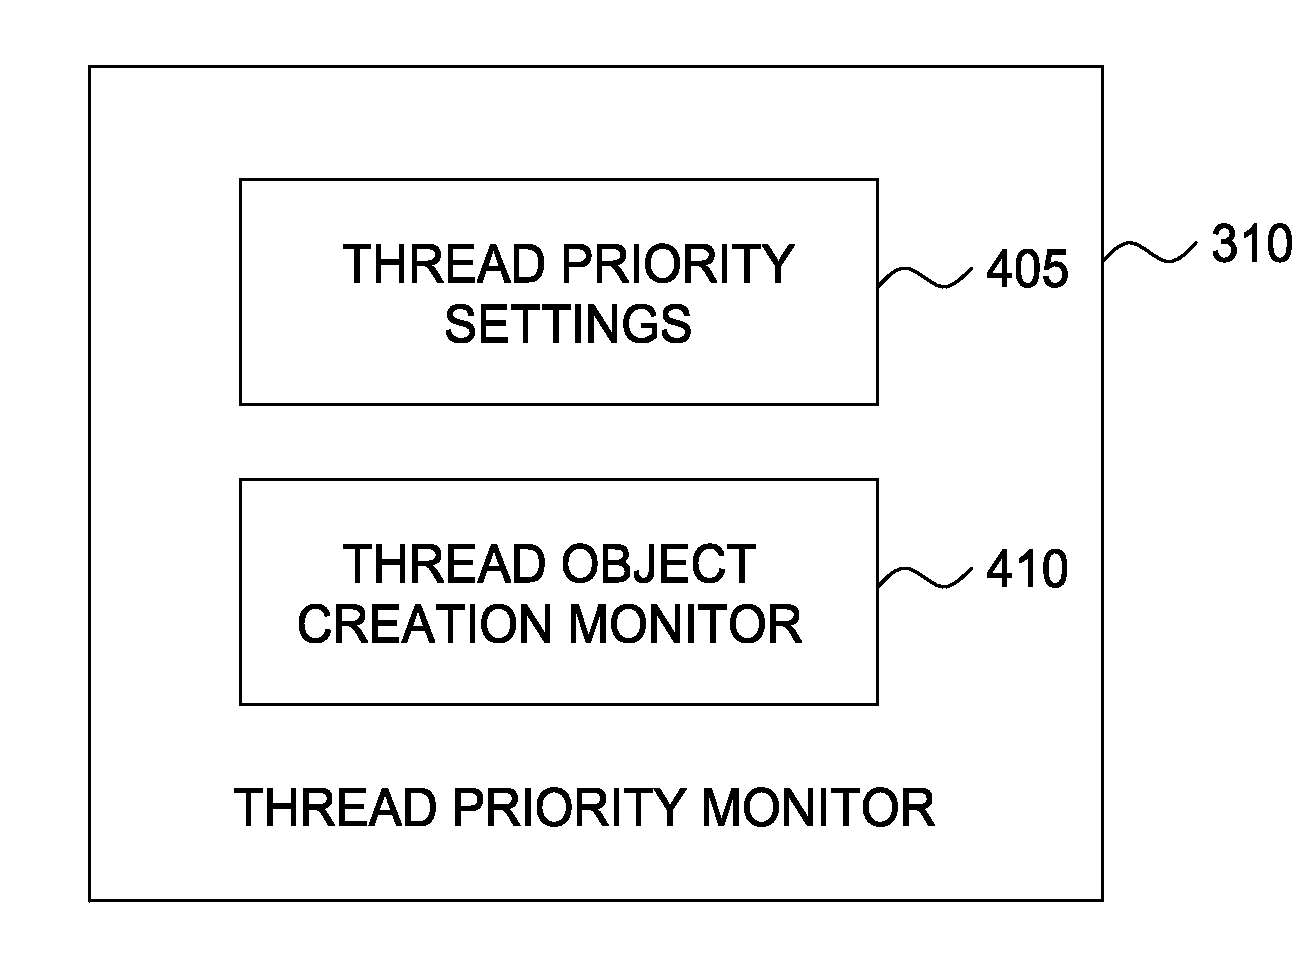 Thread priority based on object creation rates